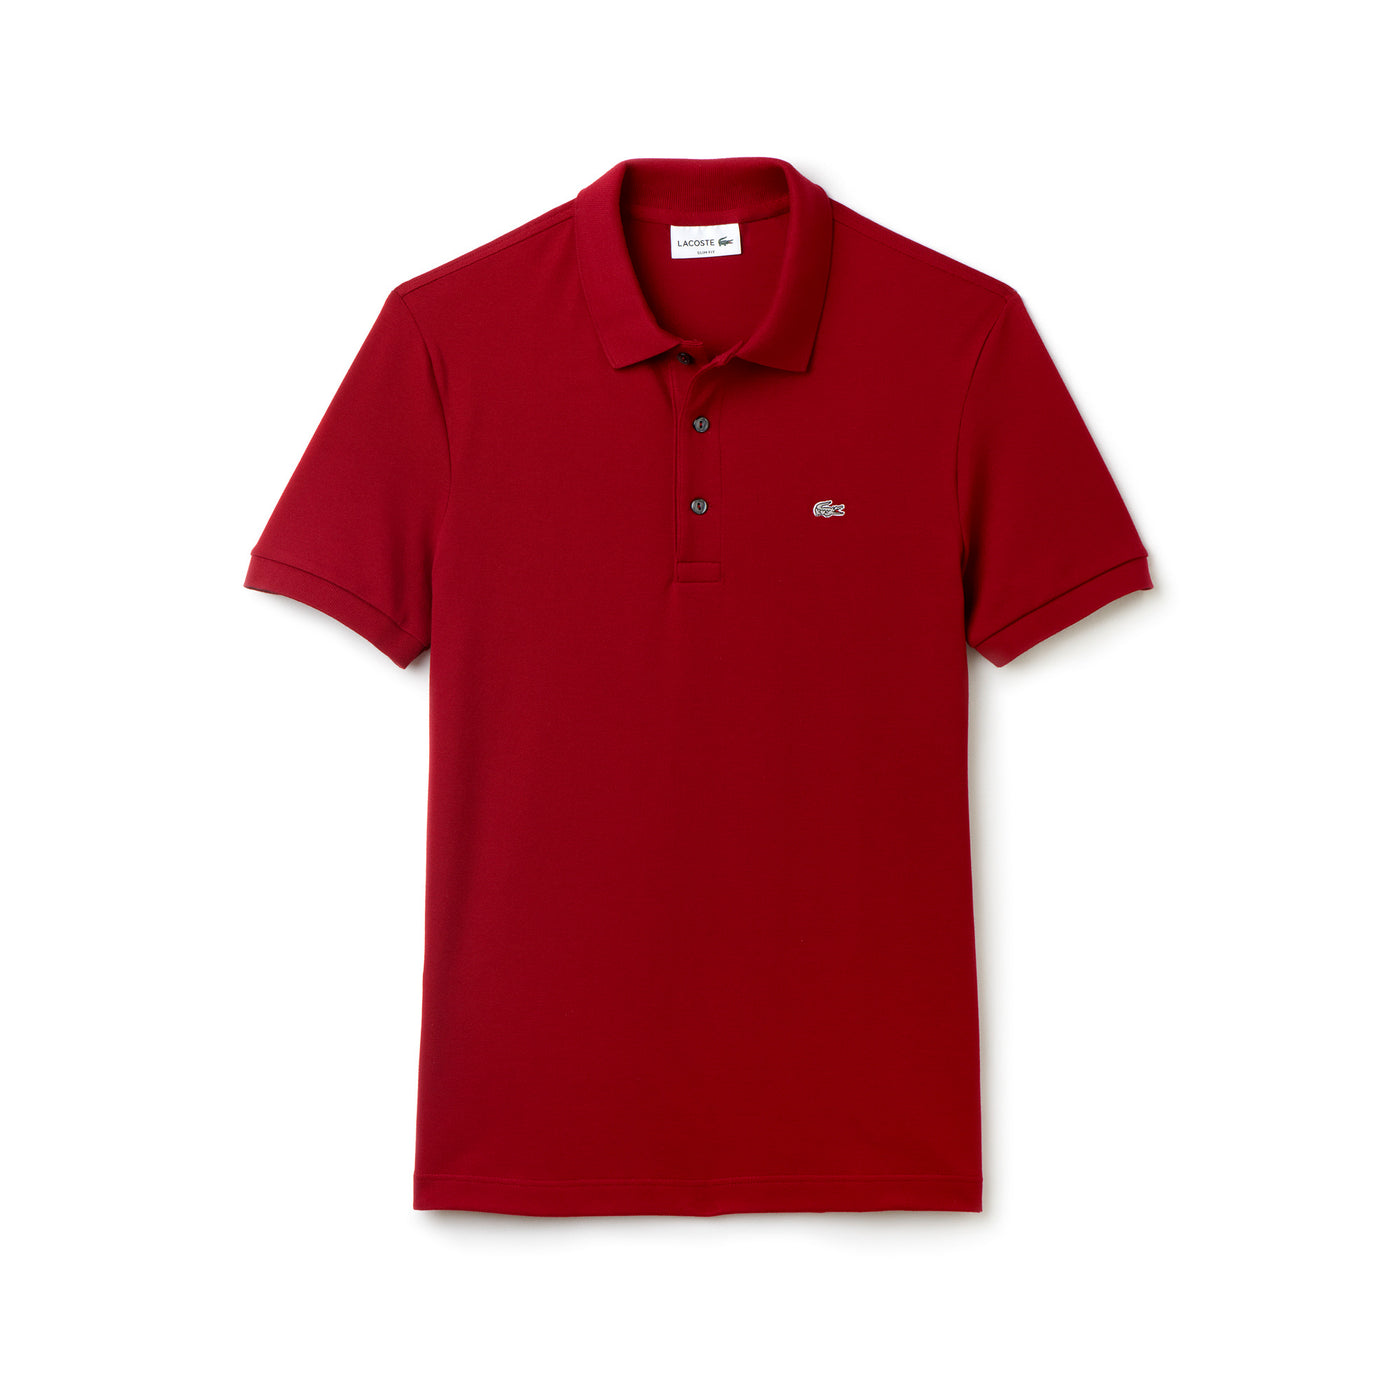 Shop The Latest Collection Of Outlet - Lacoste Men'S Slim Fit Lacoste Polo Shirt In Stretch Petit Piquã© - Ph4014 In Lebanon